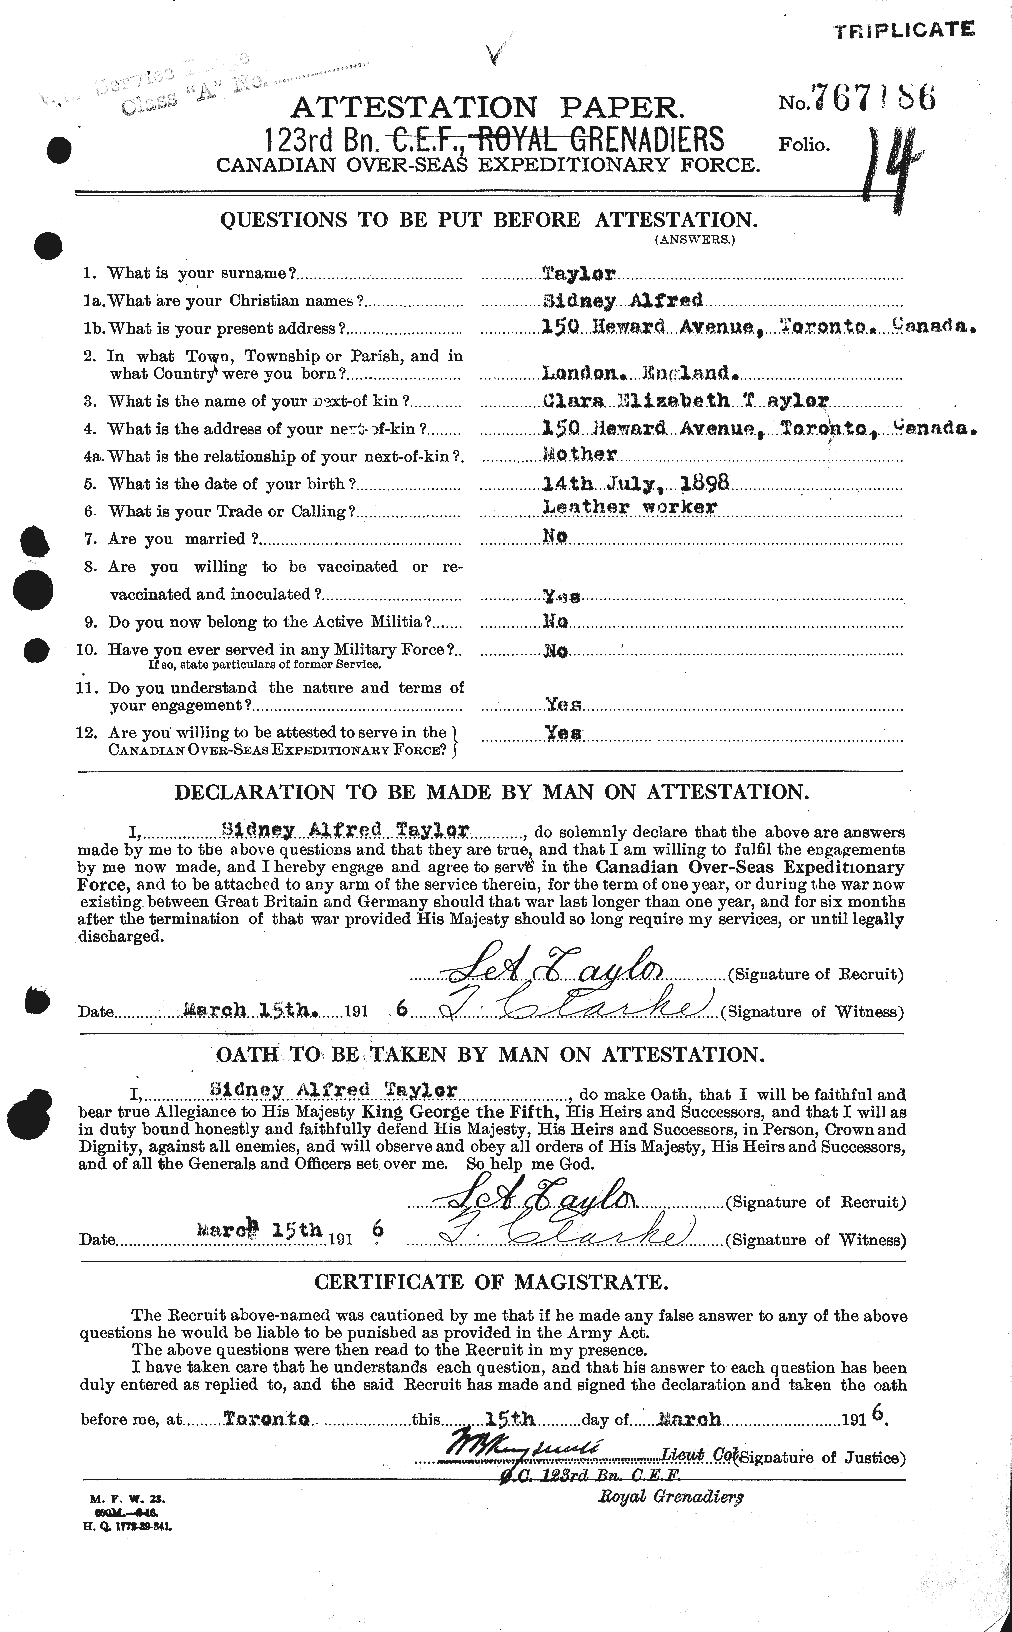 Personnel Records of the First World War - CEF 627894a